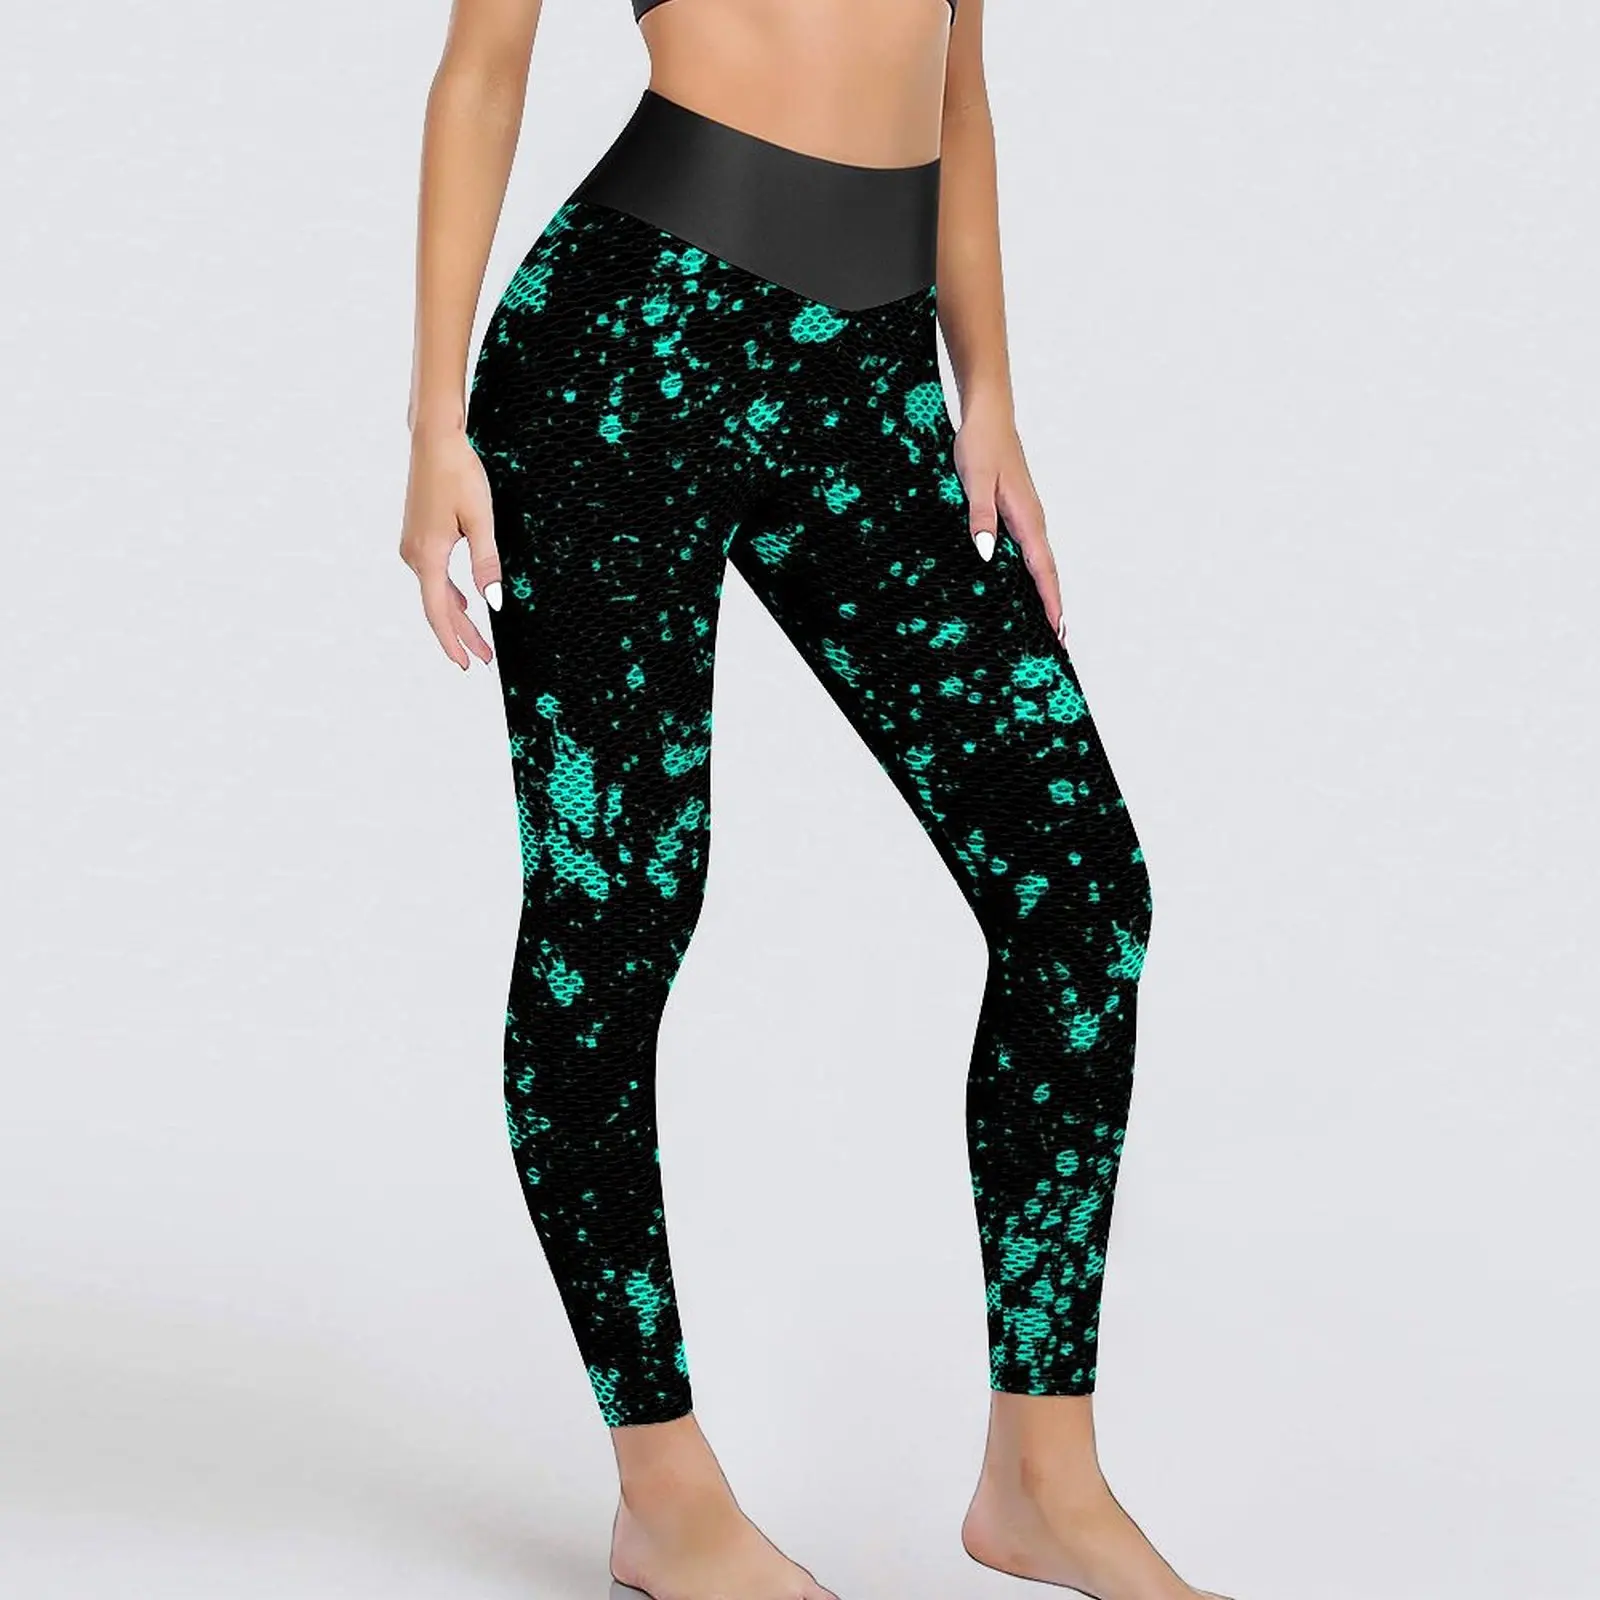 

Paint Splatter Artistic Leggings Sexy Blue And Black Work Out Yoga Pants High Waist Stretchy Sports Tights Funny Custom Leggins